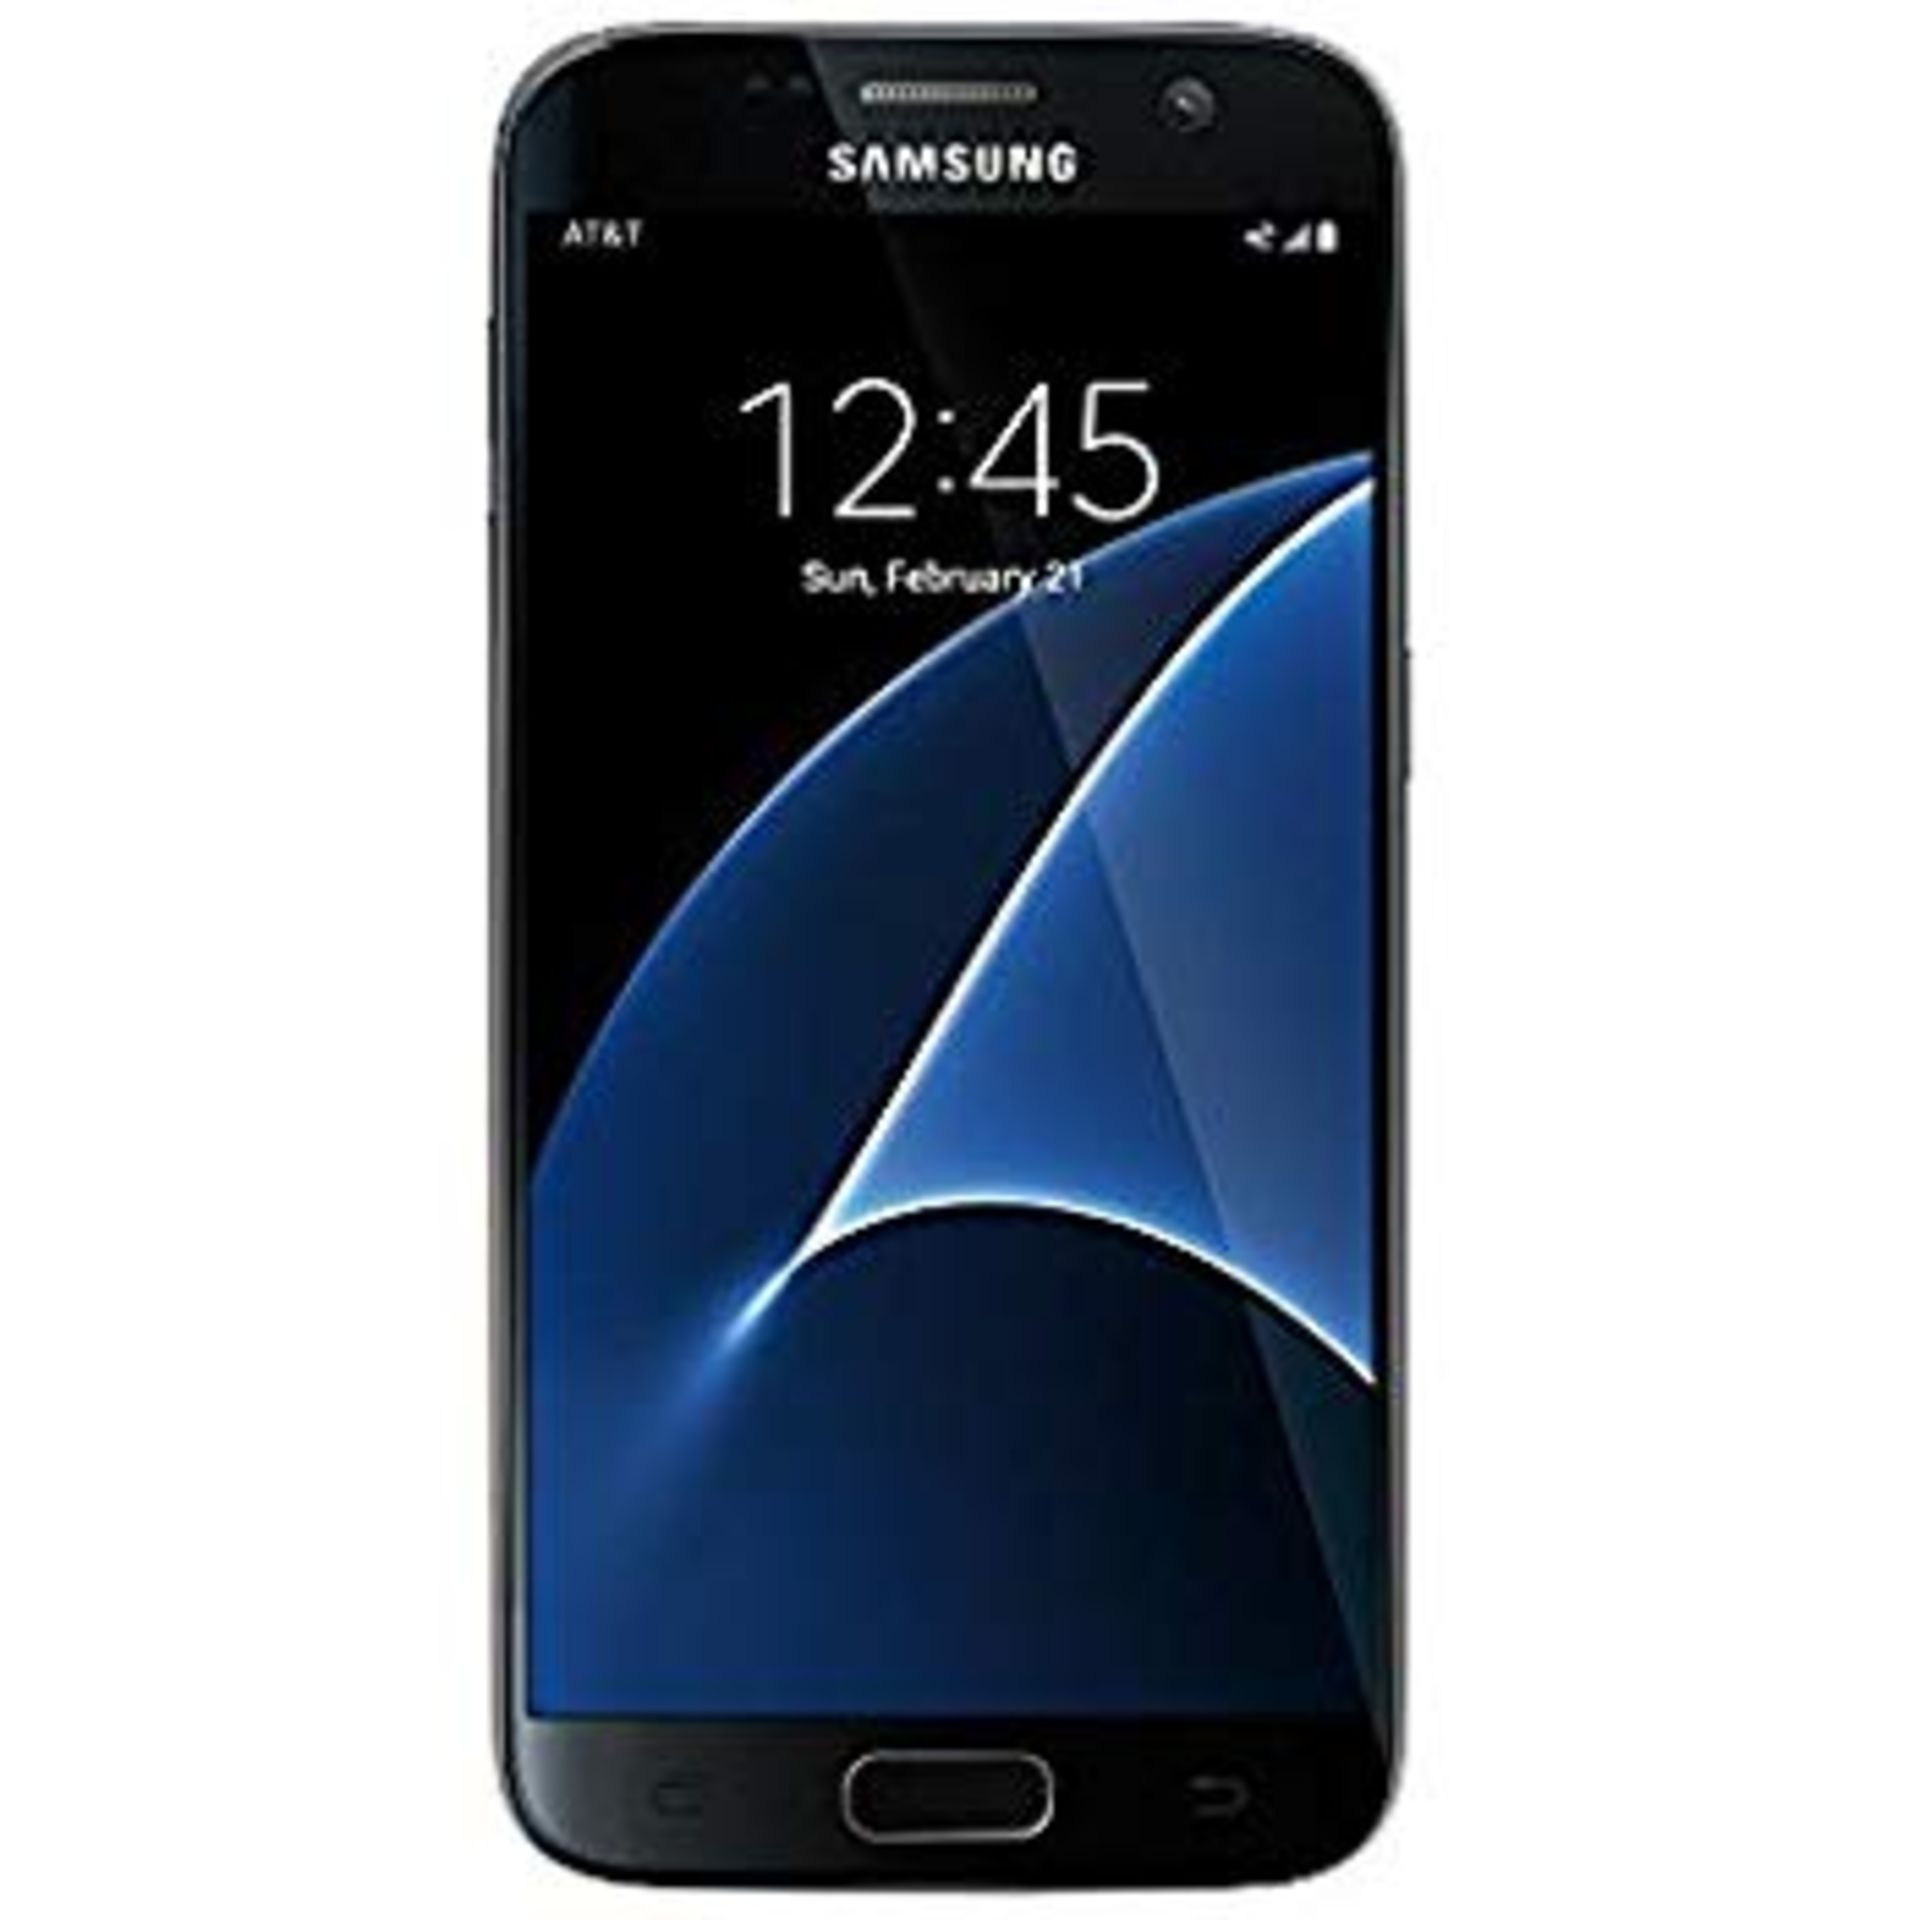 No VAT Grade A Samsung S7 ( G930A/T/V/P ) Colours May Vary - Item Available After Approx 15 Working - Image 2 of 2